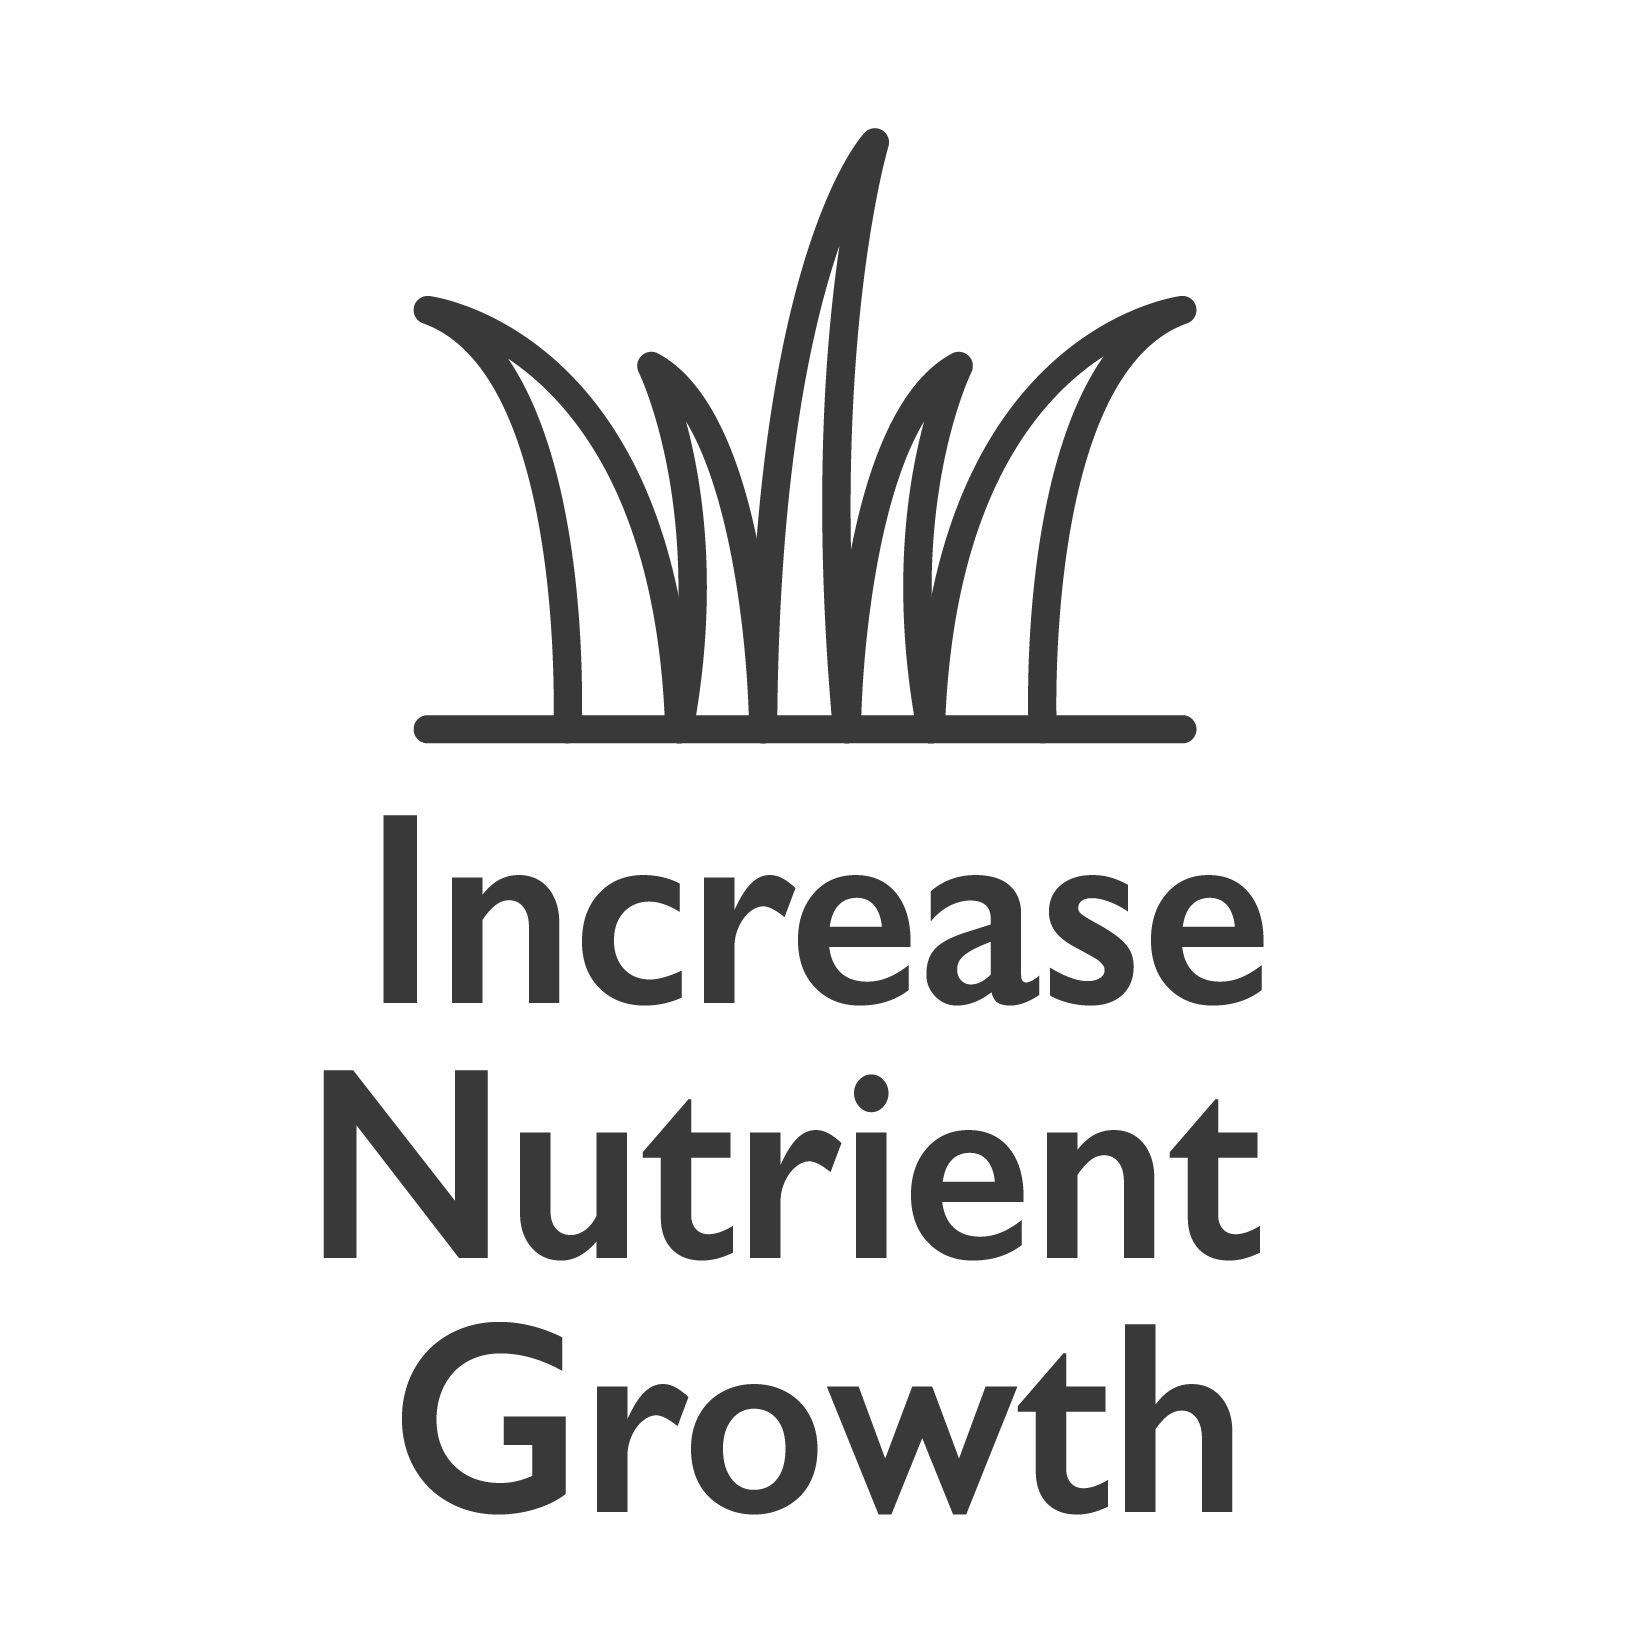 increase nutrient growth